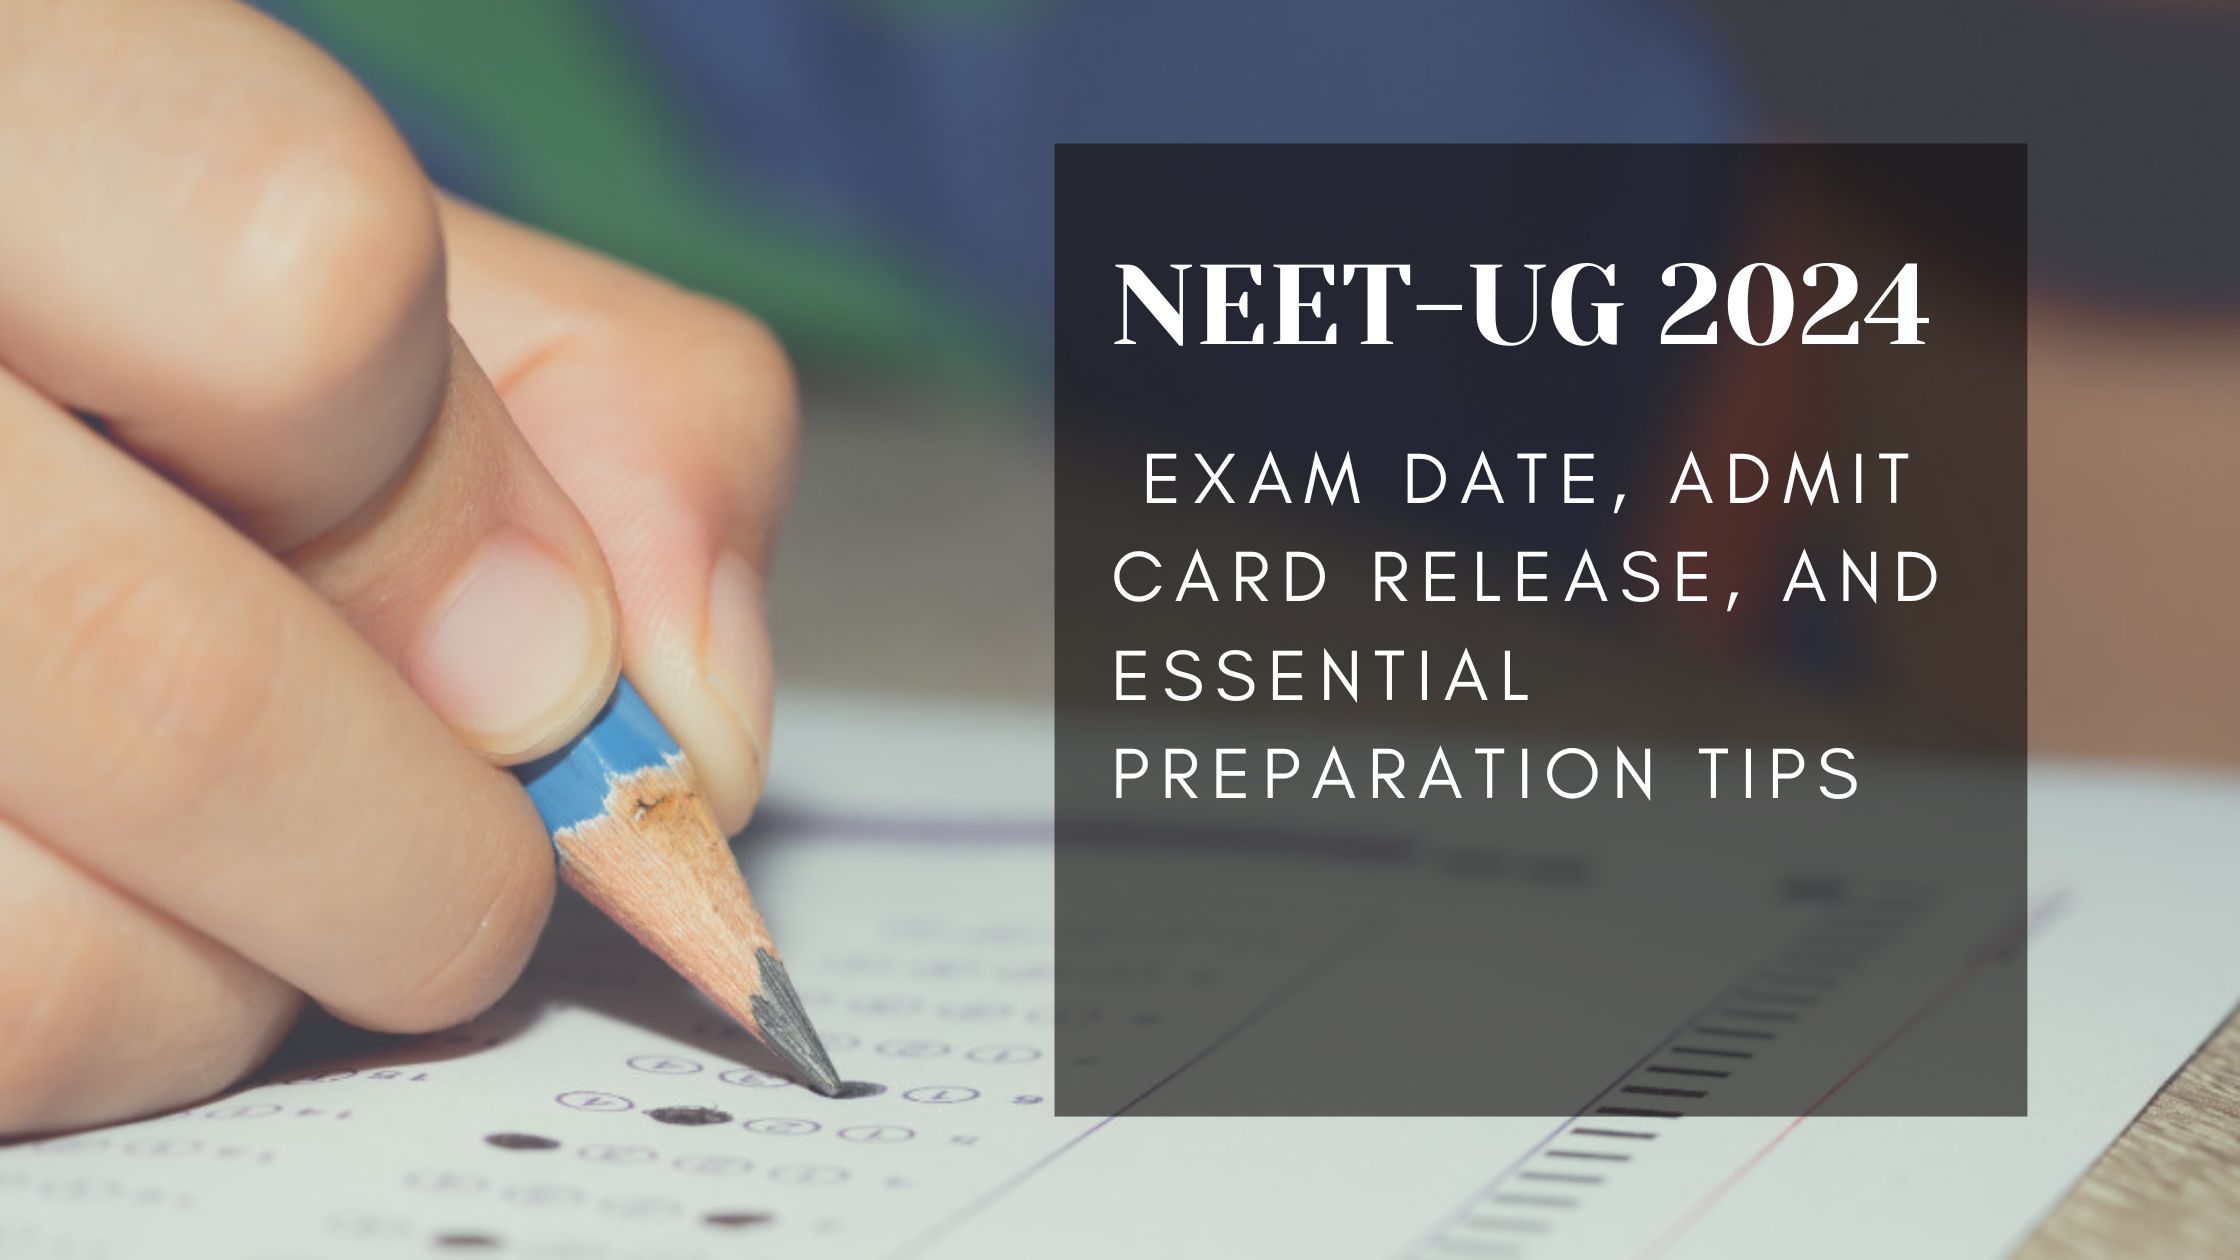 NEET-UG 2024: Exam Date, Admit Card Release, and Essential Preparation Tips